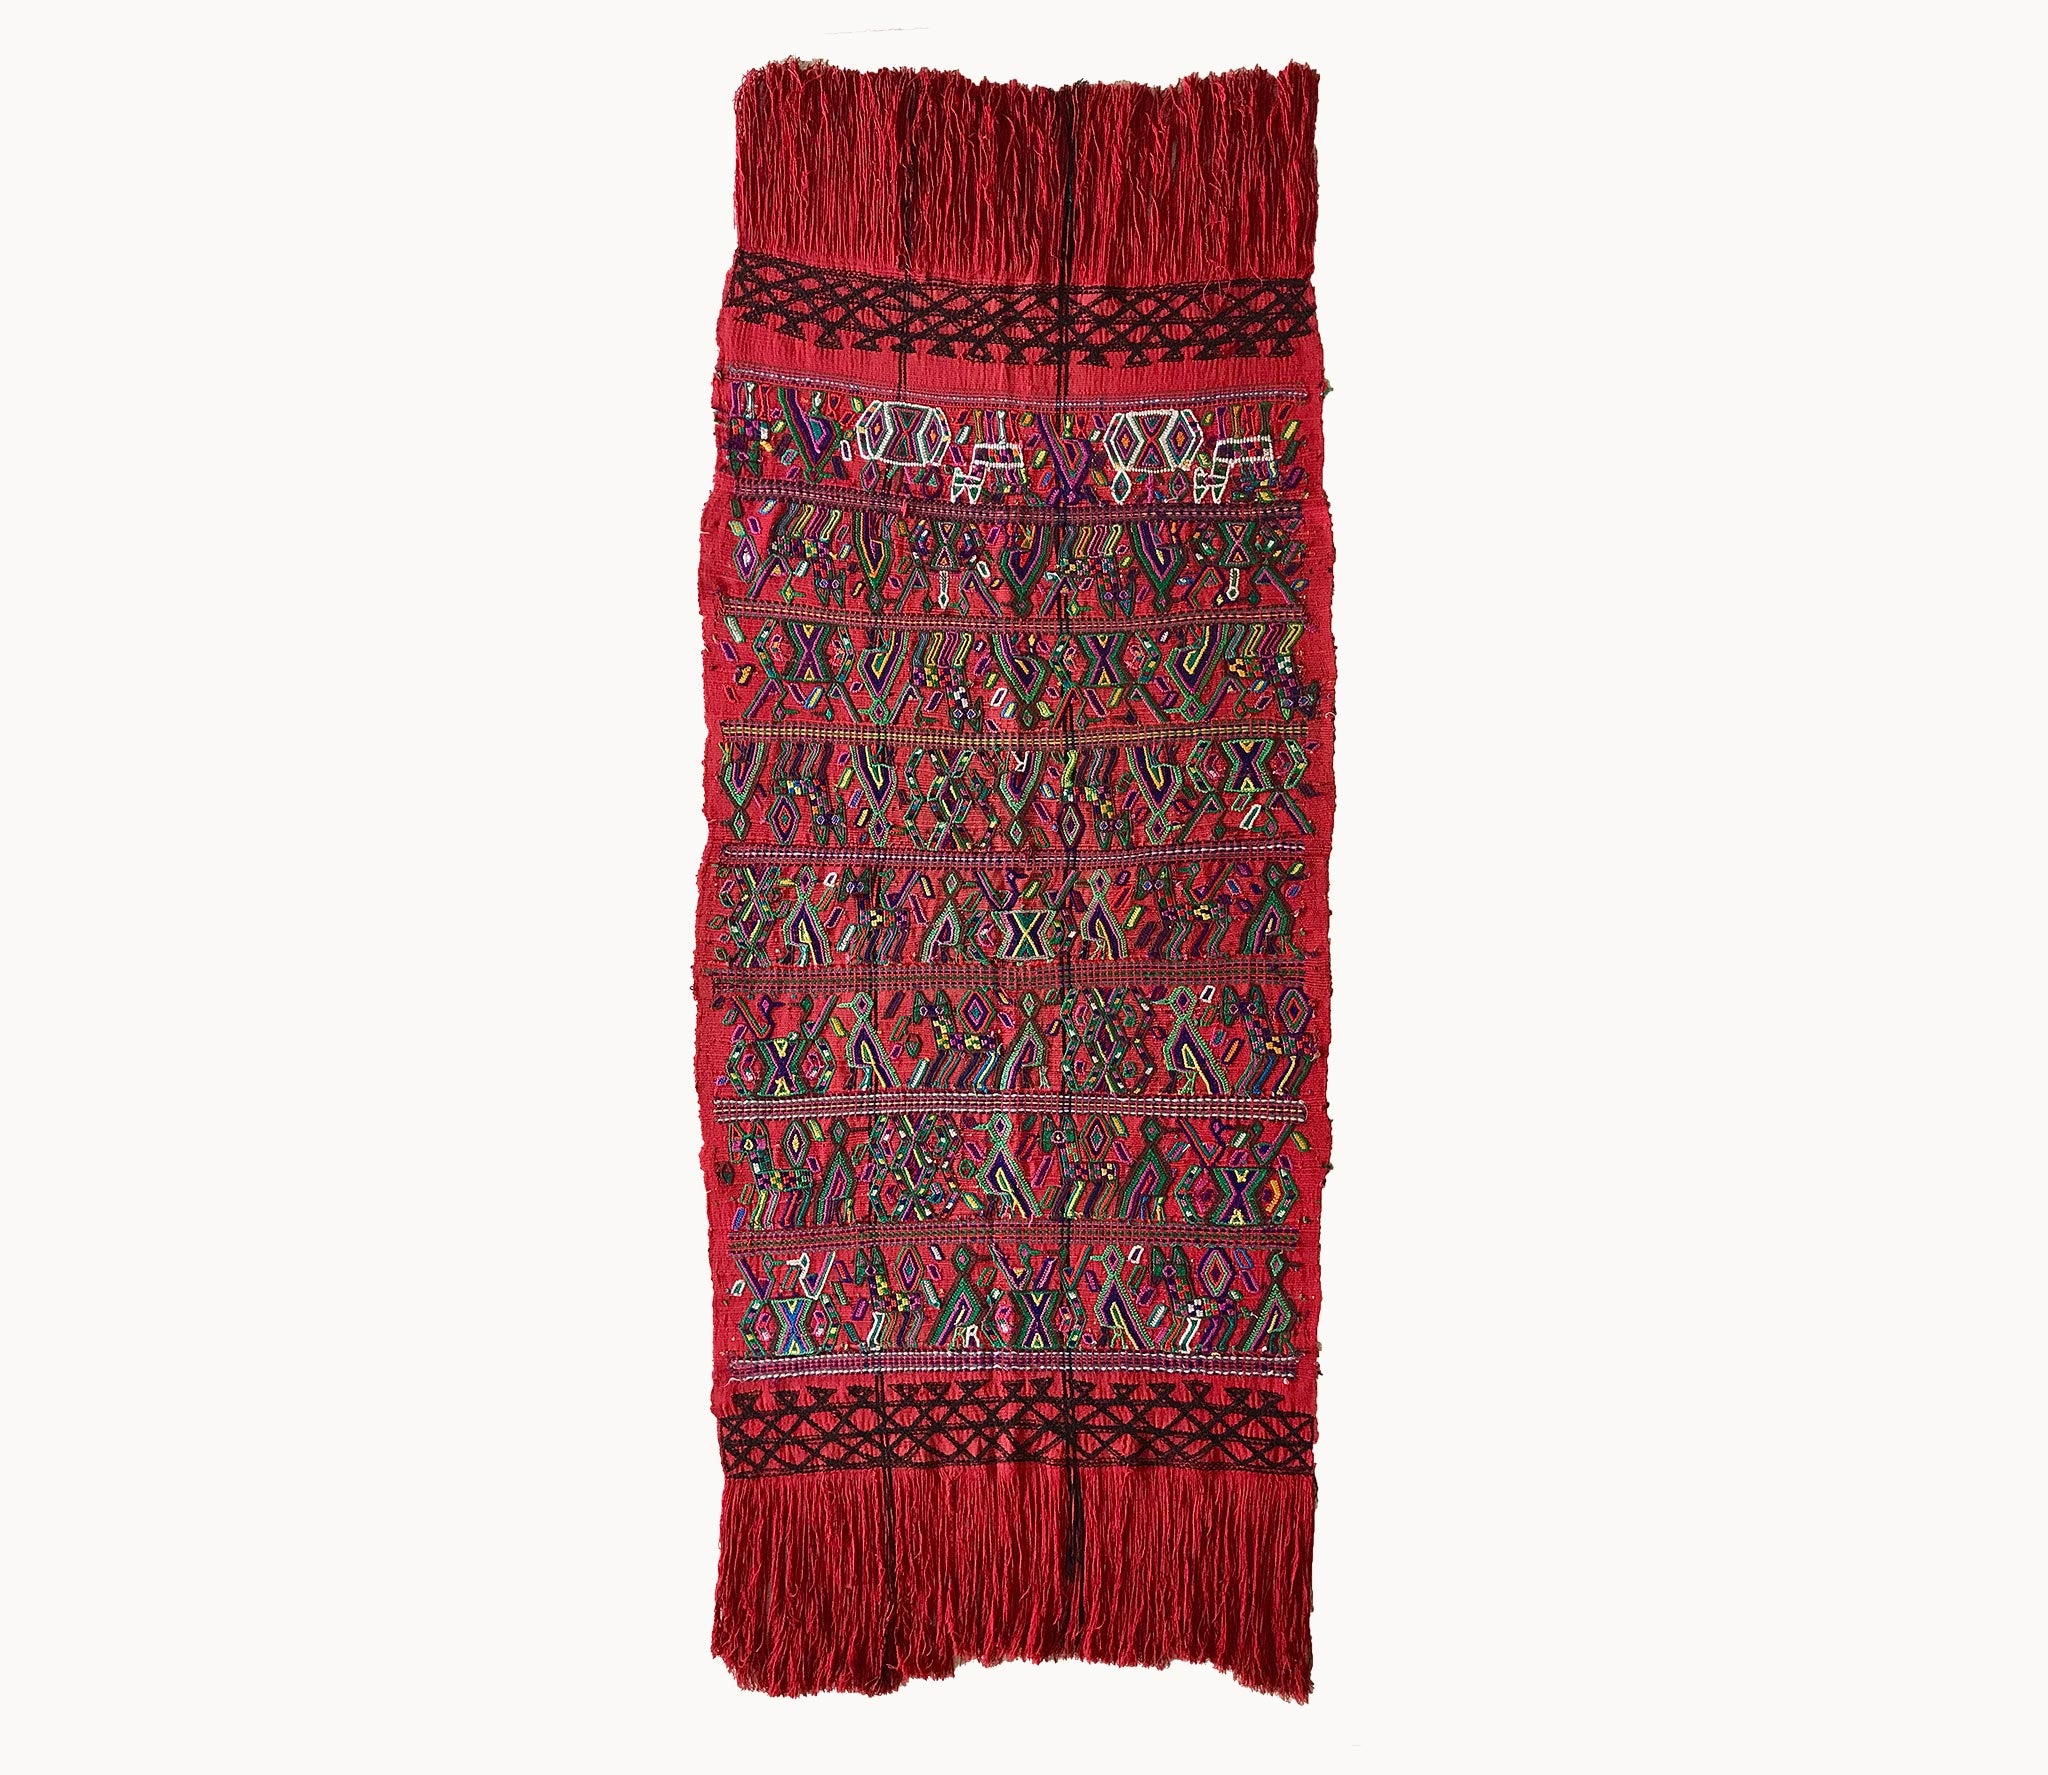 Guatemalan Textile, red table runner with colourful embroidery, originally a Nahuala tzute